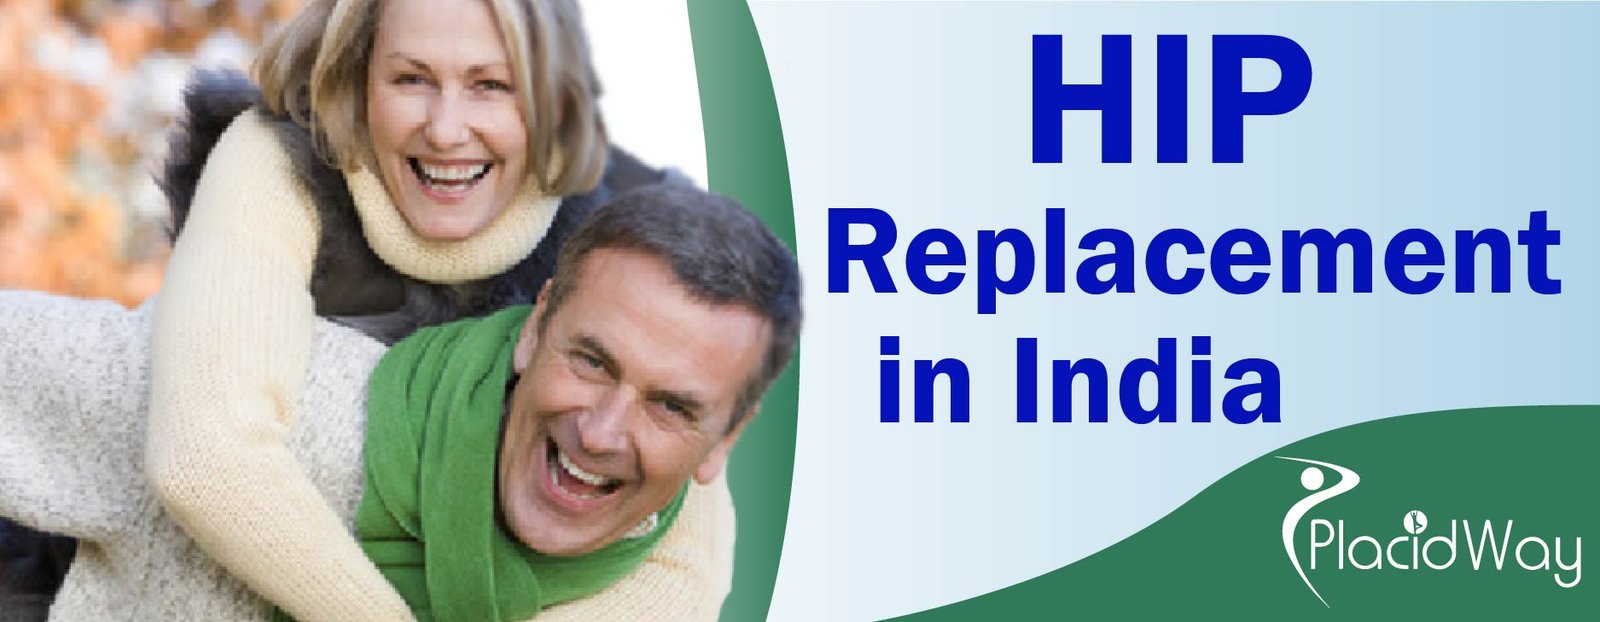 Hip Replacement Packages in India